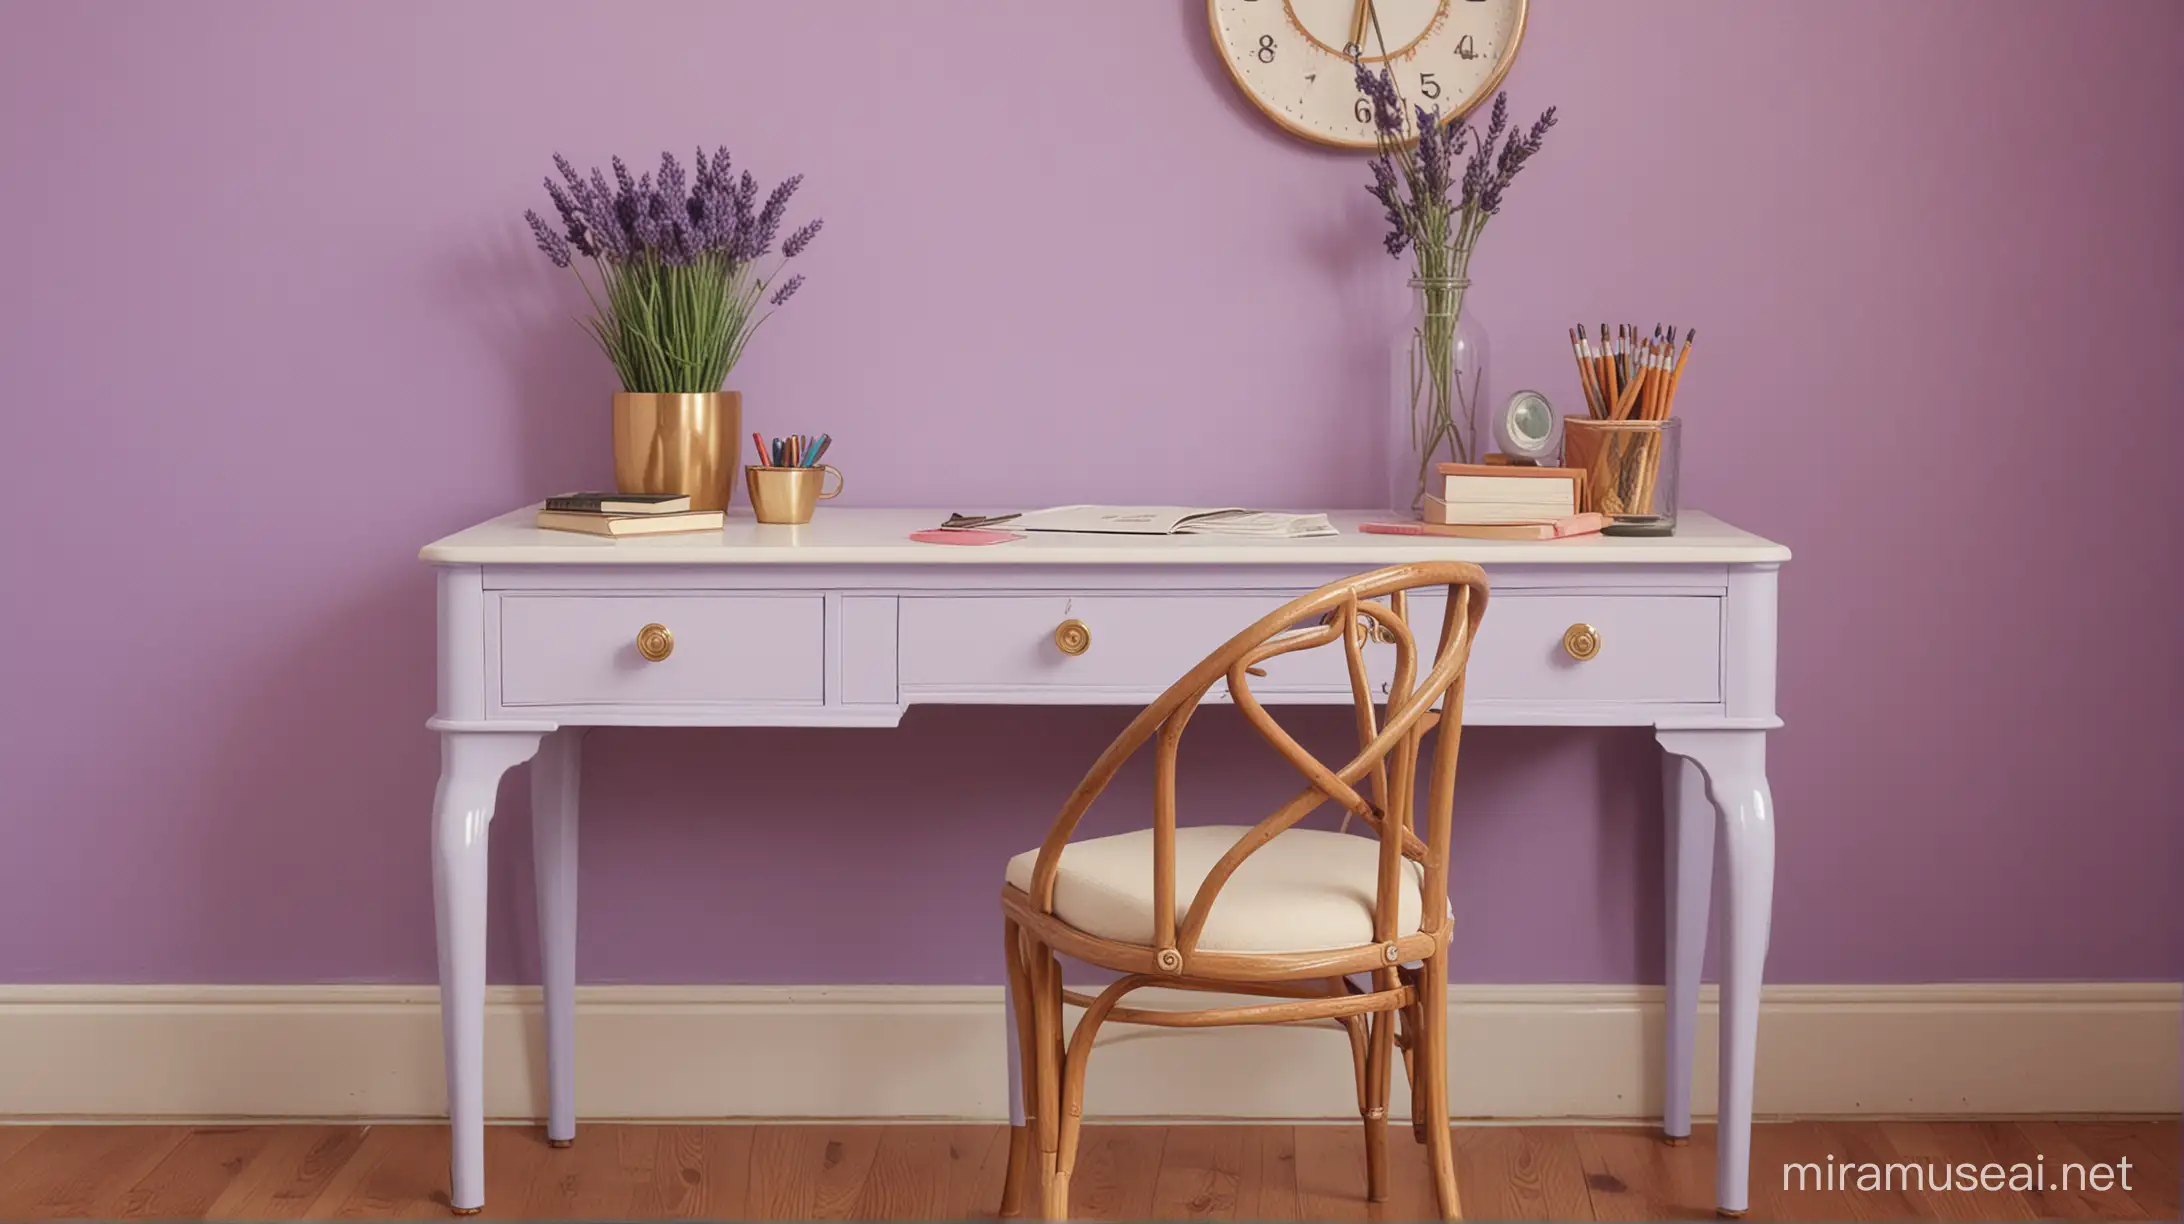 Stylish Lavender Desk Inspired by Wes Anderson